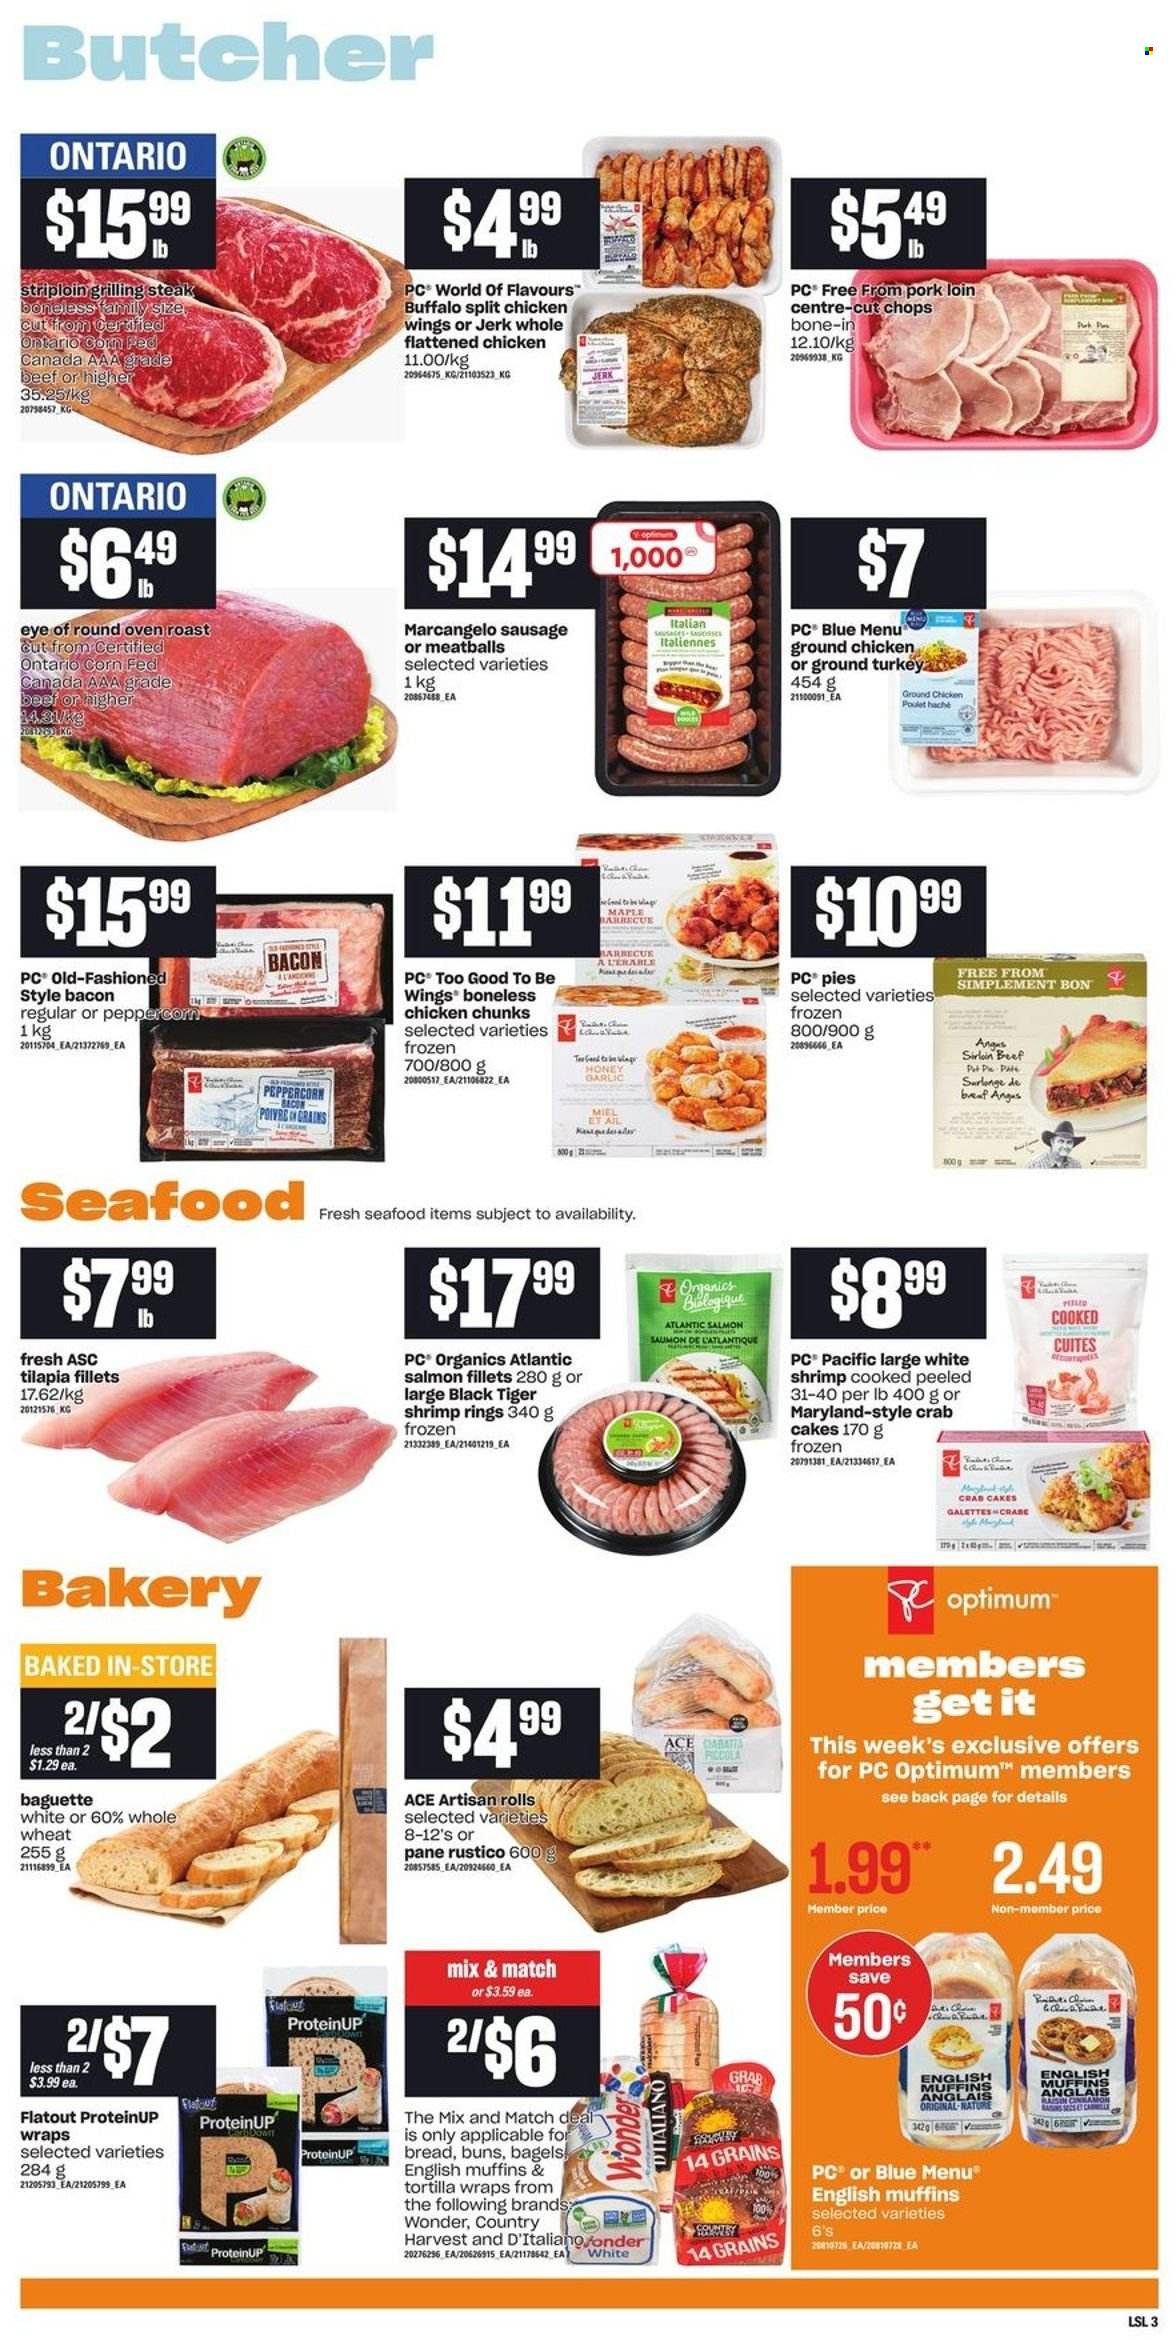 thumbnail - Loblaws Flyer - January 20, 2022 - January 26, 2022 - Sales products - bagels, english muffins, tortillas, buns, wraps, garlic, salmon, salmon fillet, tilapia, seafood, shrimps, crab cake, meatballs, bacon, sausage, Country Harvest, chicken wings, honey, ground chicken, chicken, eye of round, pork loin, pork meat, Optimum, baguette, ciabatta, steak. Page 4.